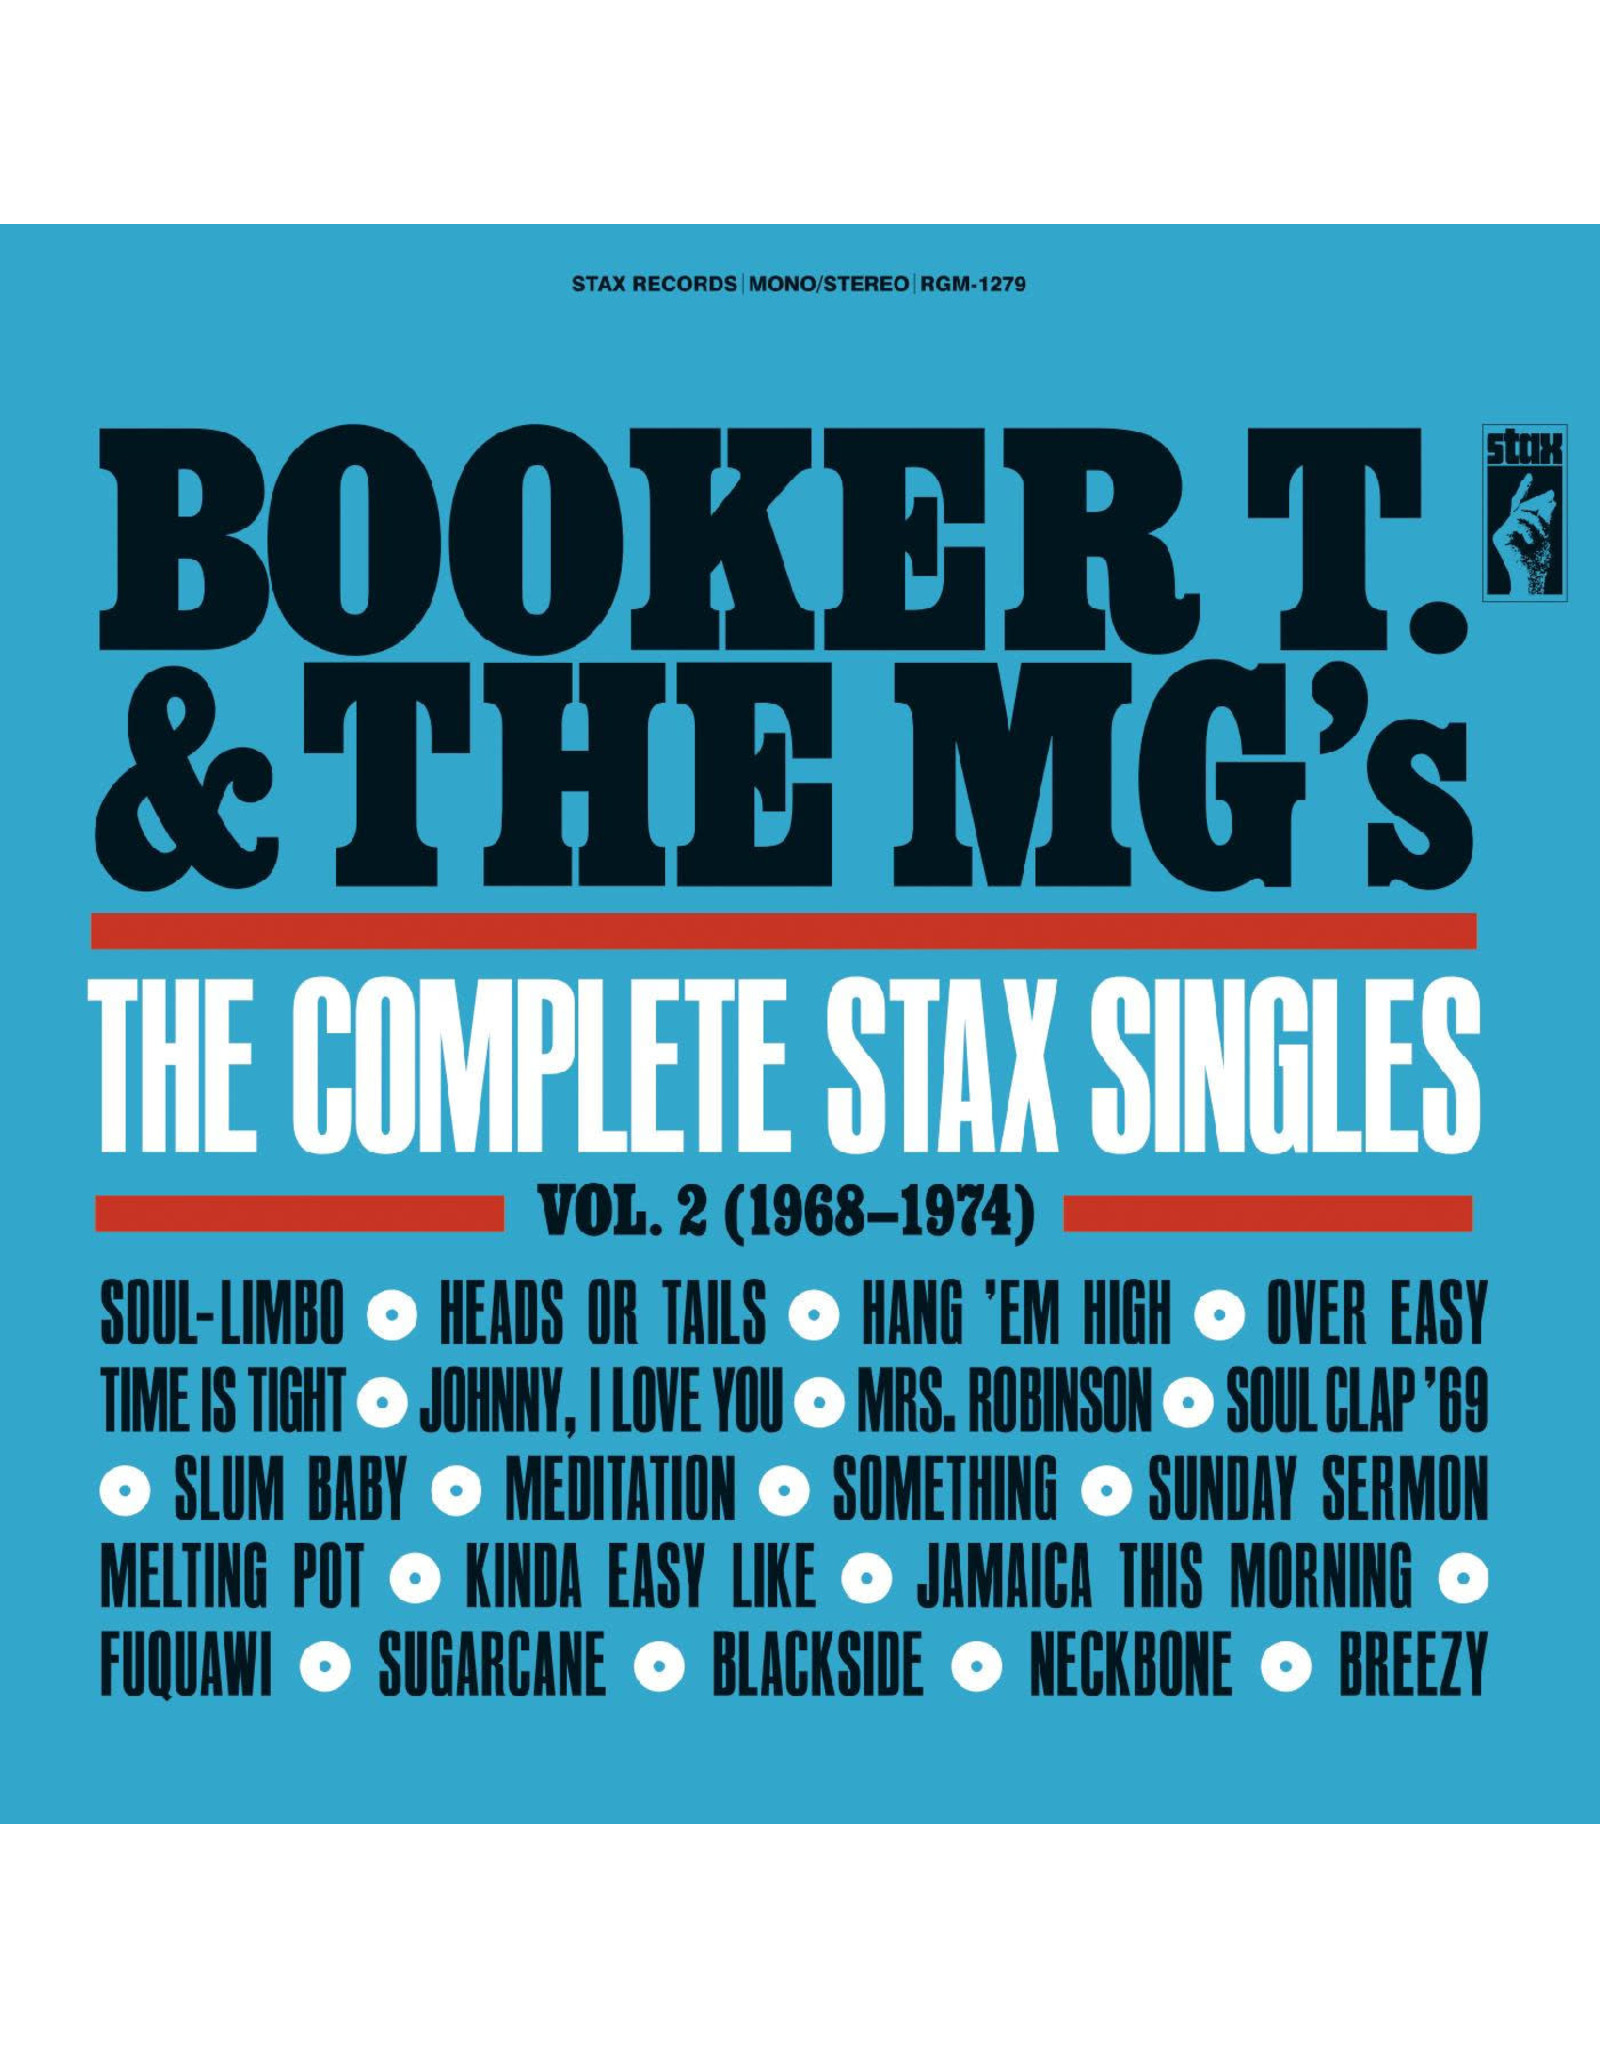 New Vinyl Booker T. & The MG's - The Complete Stax Singles Vol. 2: 1968-1974 (Colored) 2LP